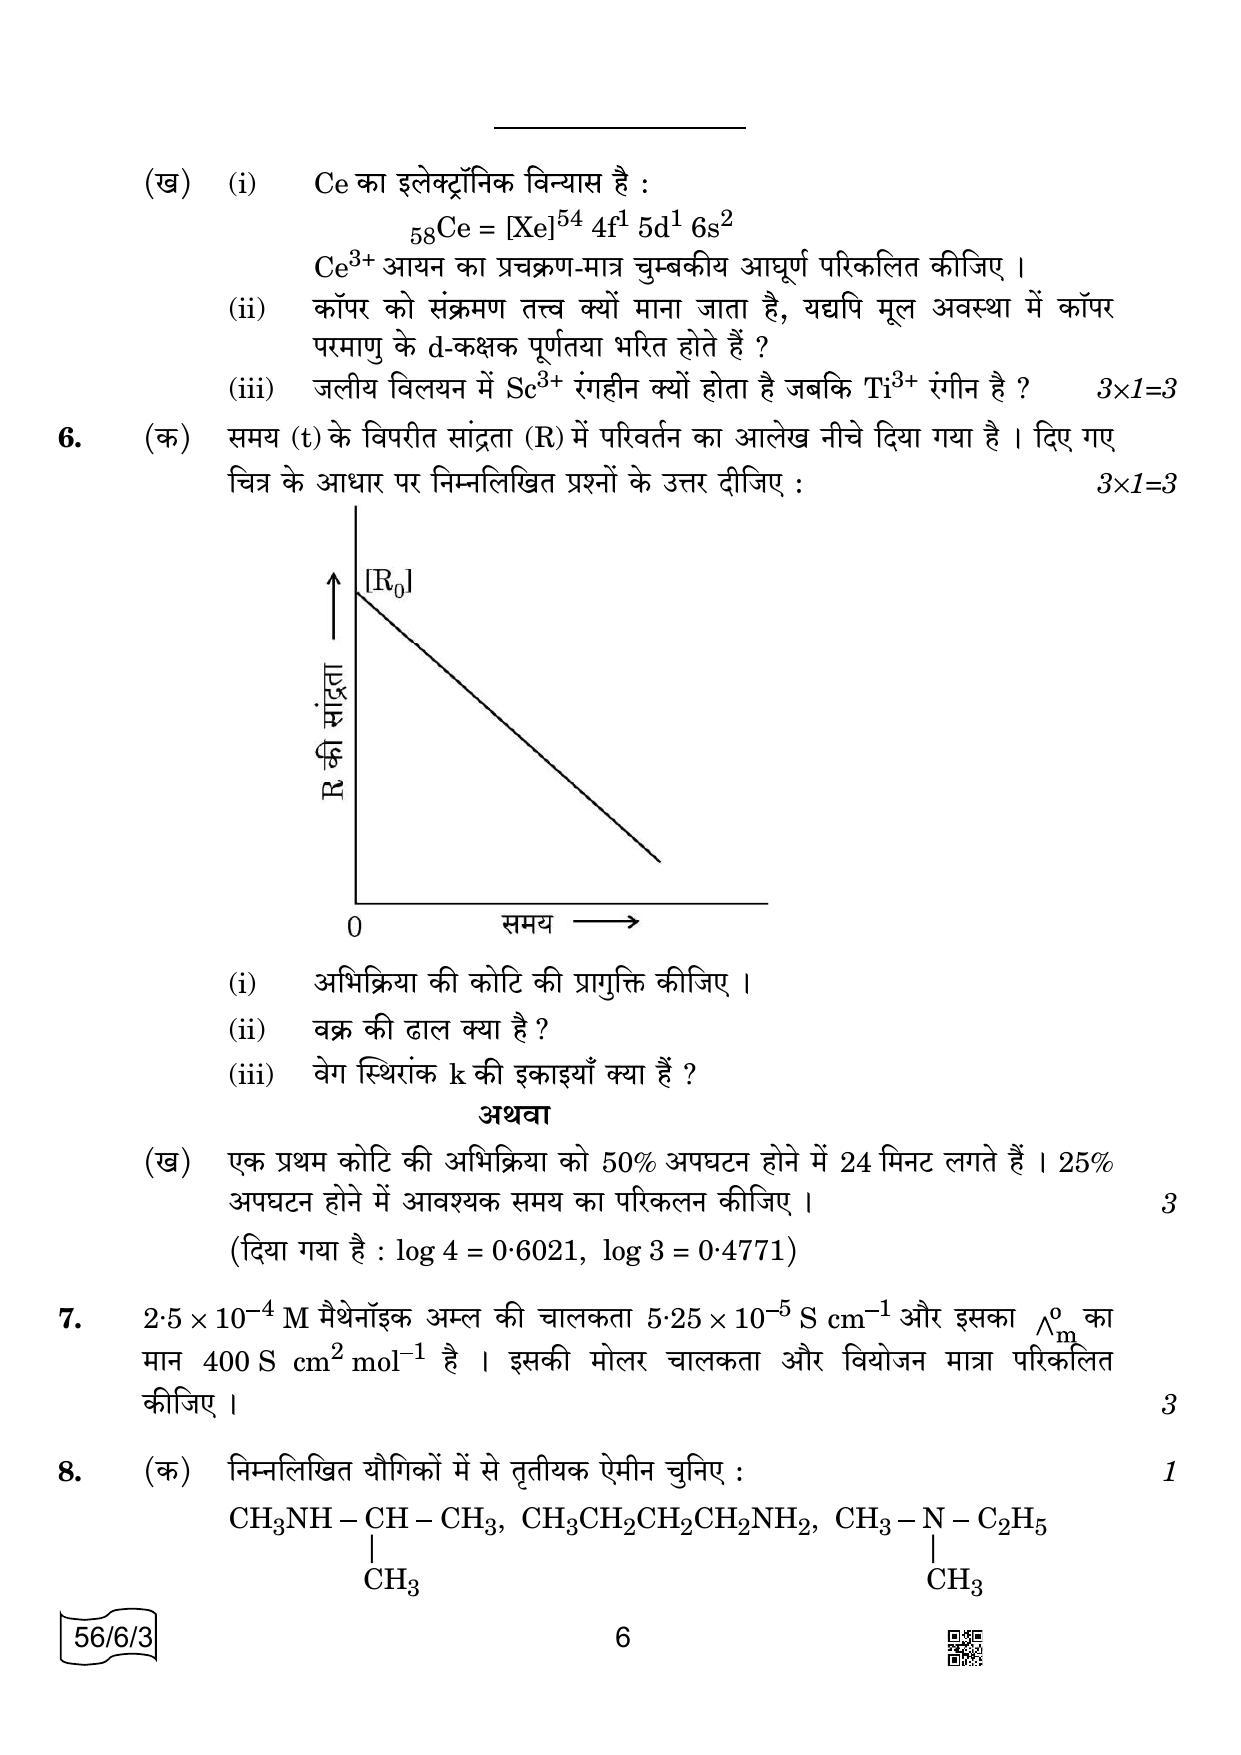 CBSE Class 12 56-6-3 CHEMISTRY 2022 Compartment Question Paper - Page 6